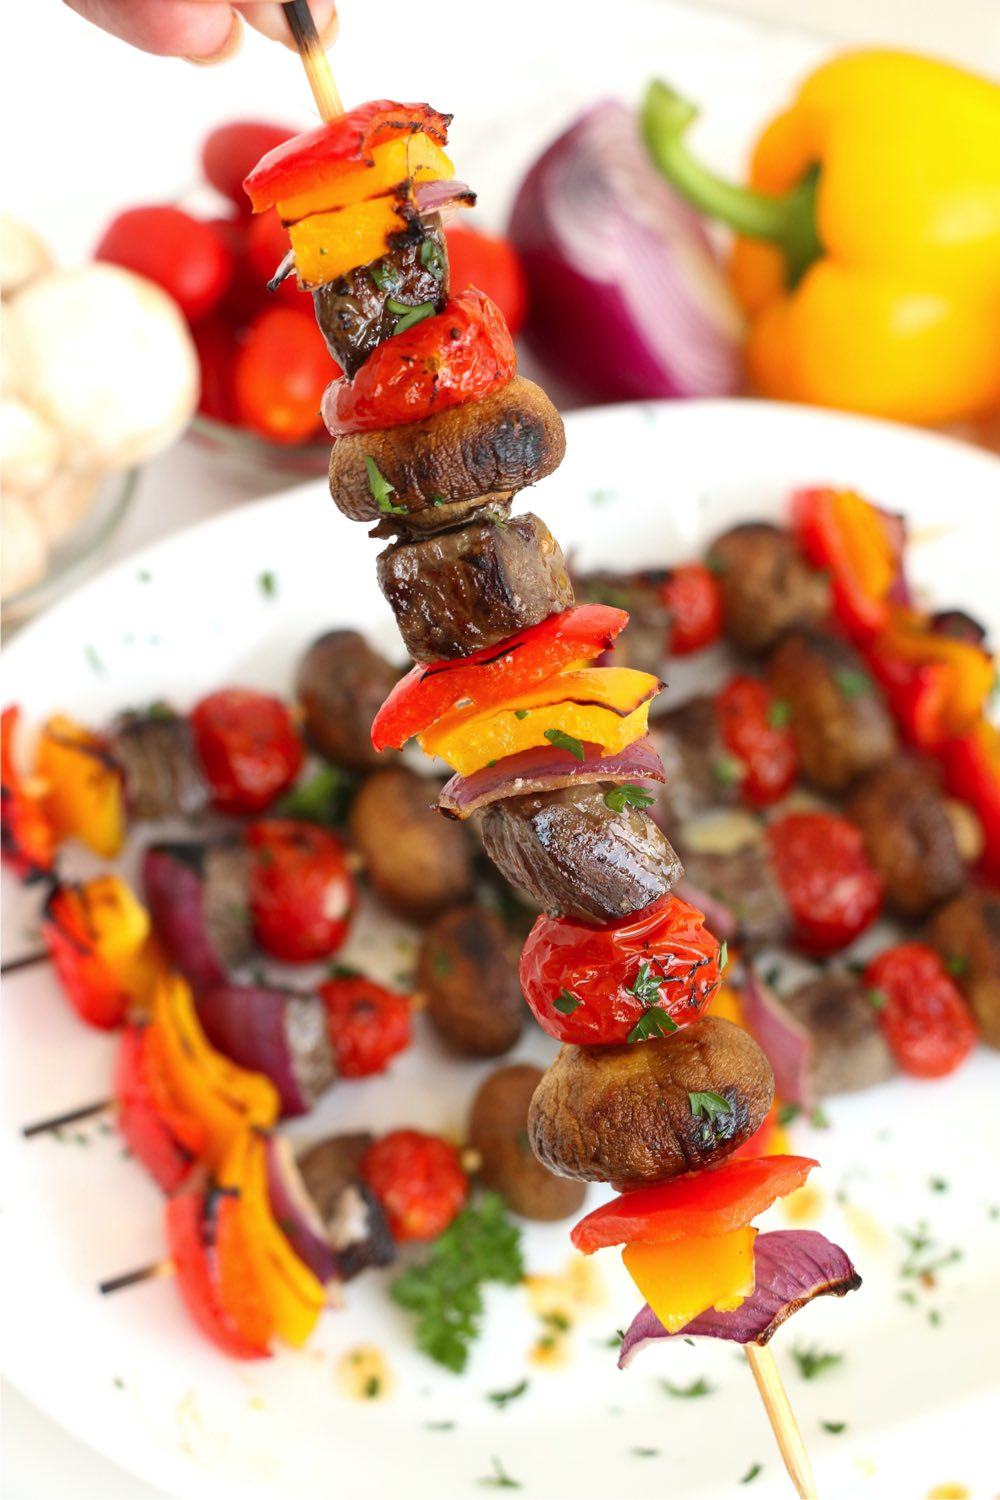 holding up a skewer filled with steak and colorful vegetables